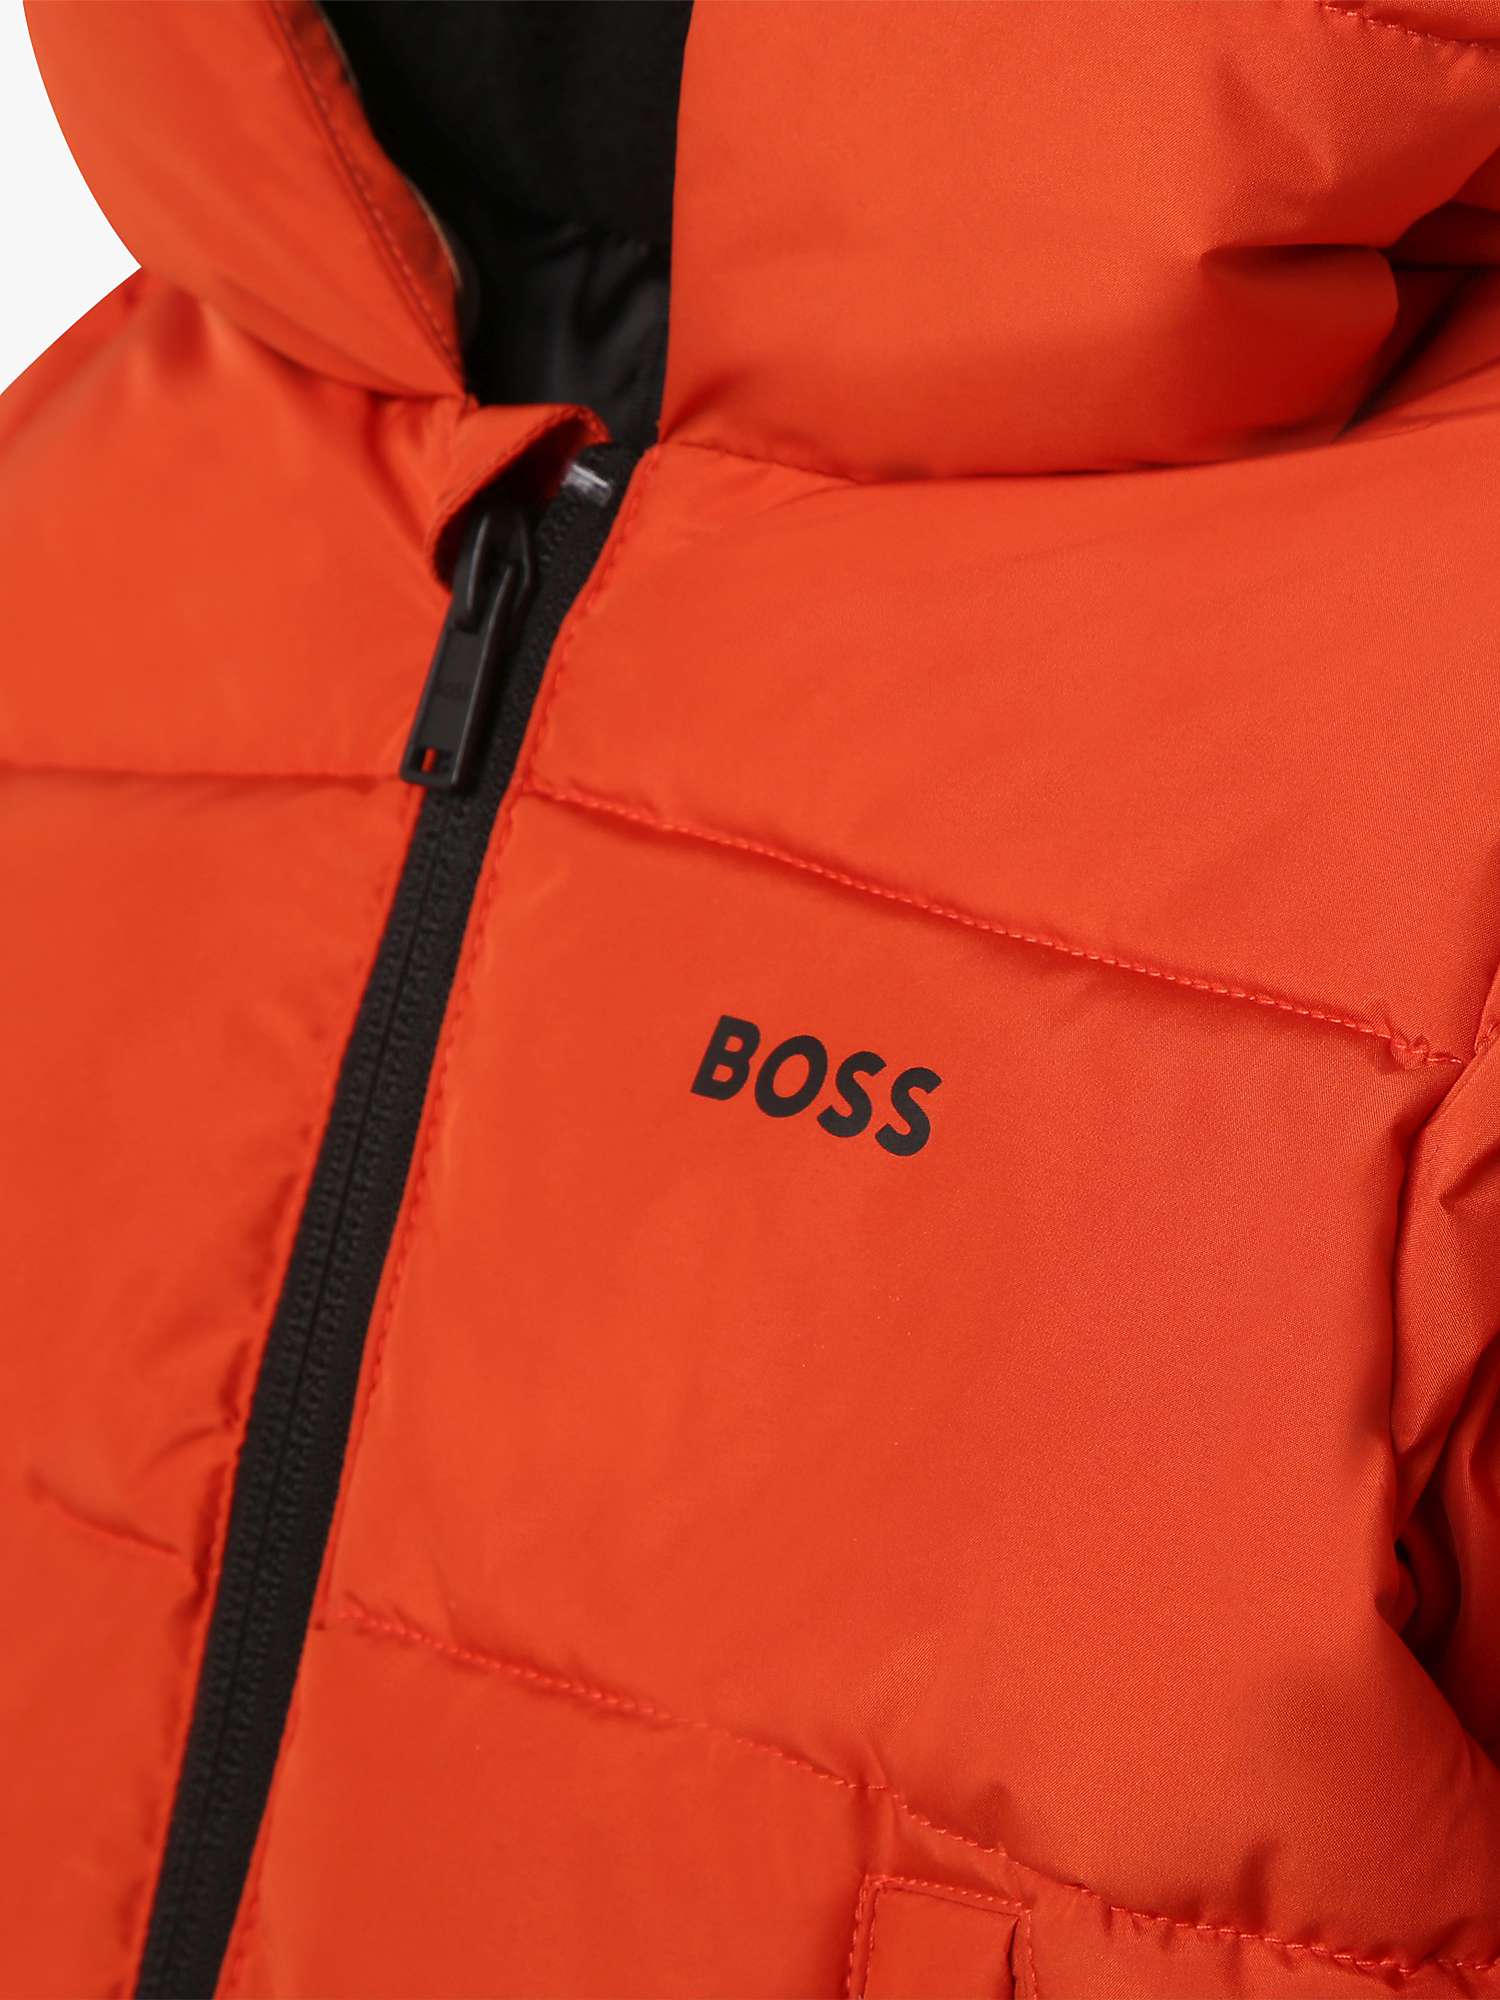 Buy BOSS Baby Puffer Hooded Jacket Online at johnlewis.com